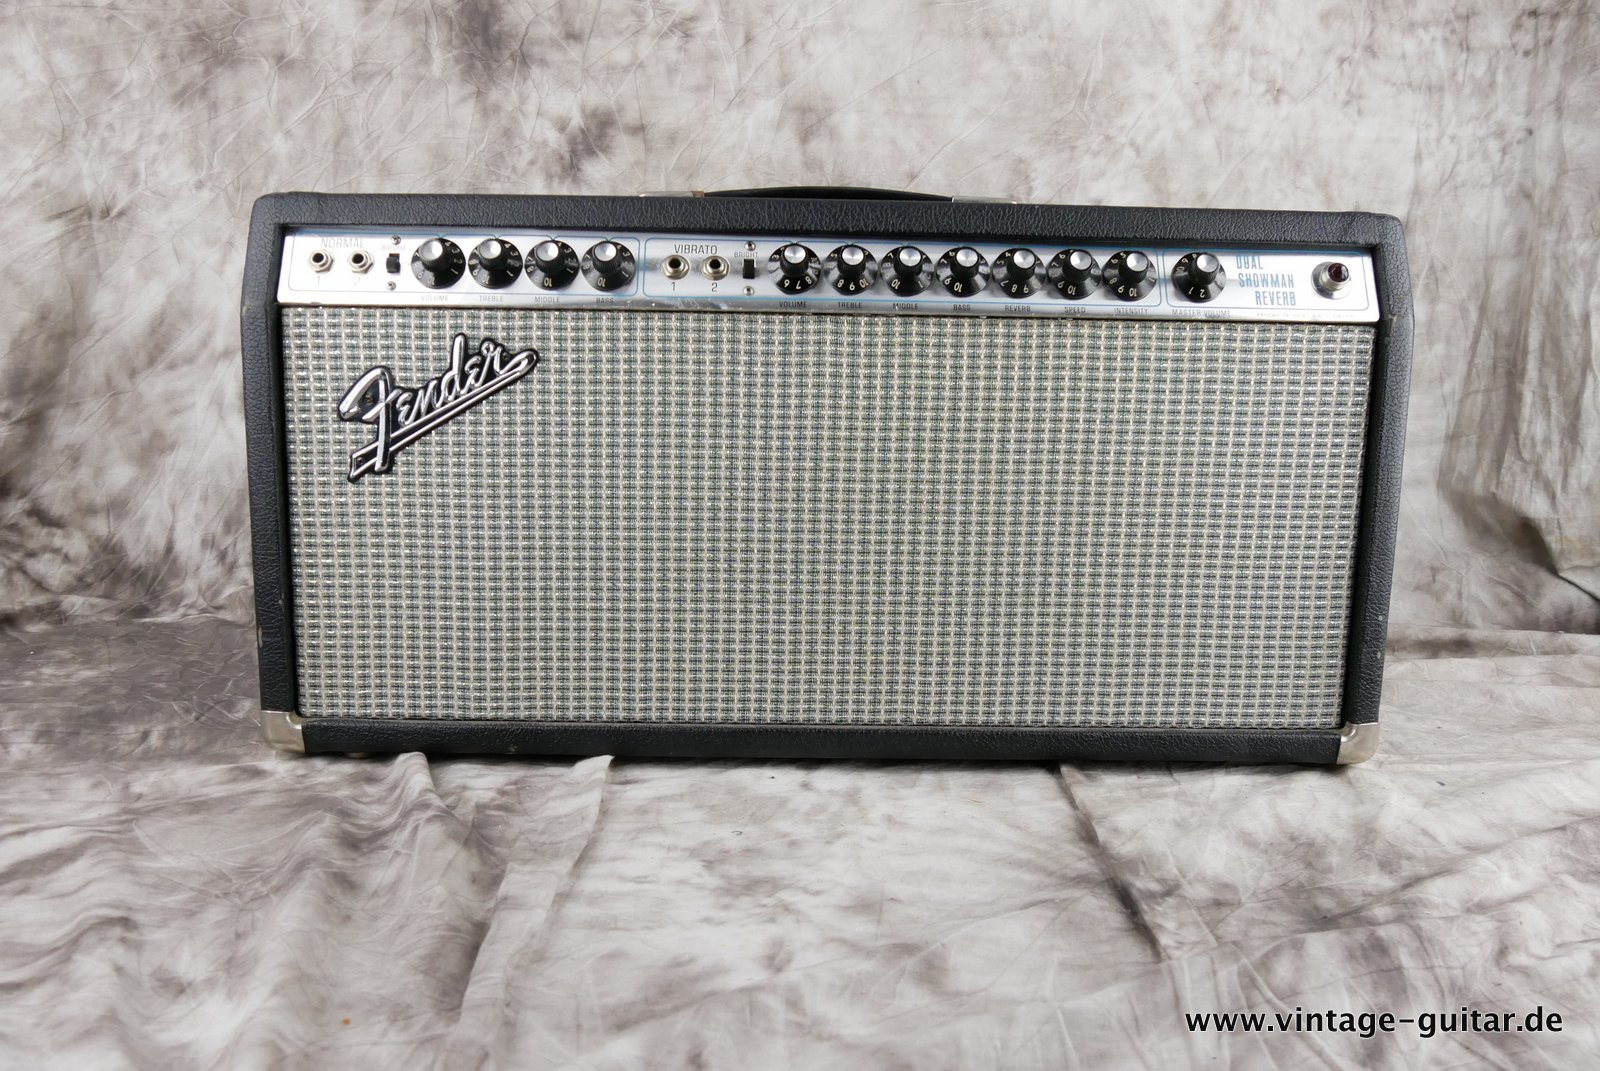 Fender-Showman-top-and-cabinet-1973-003.JPG